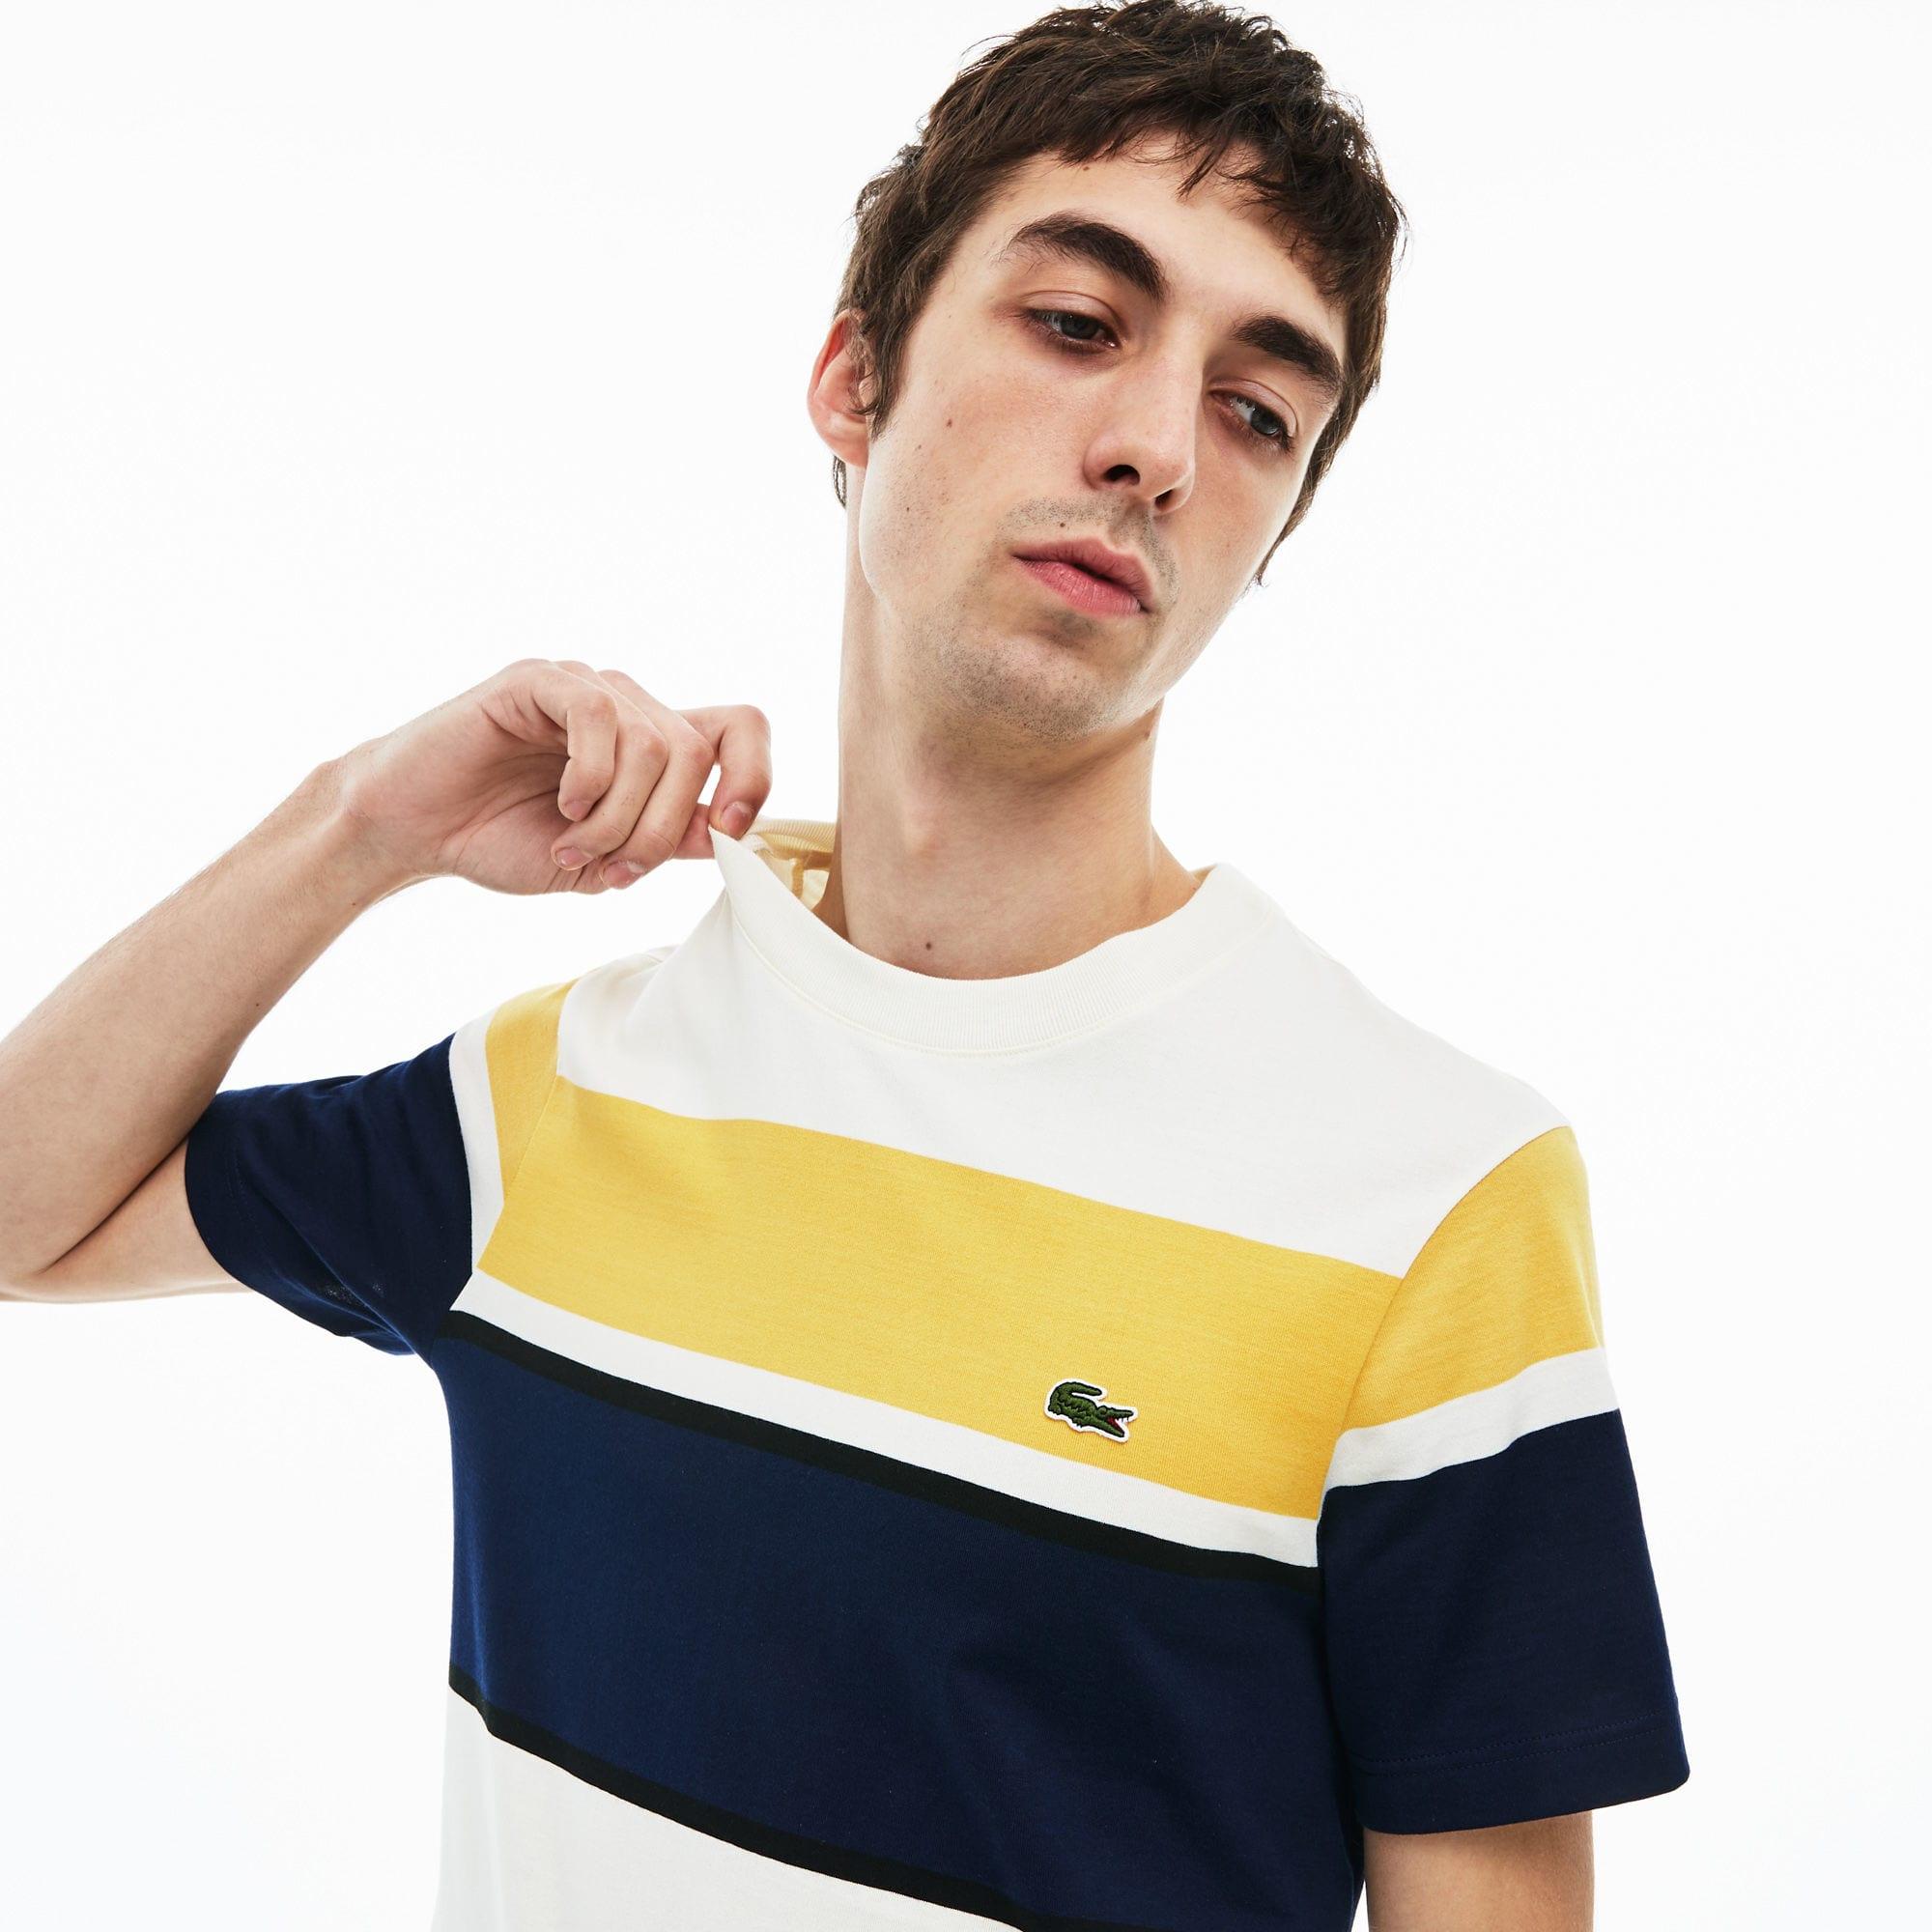 black and yellow lacoste shirt